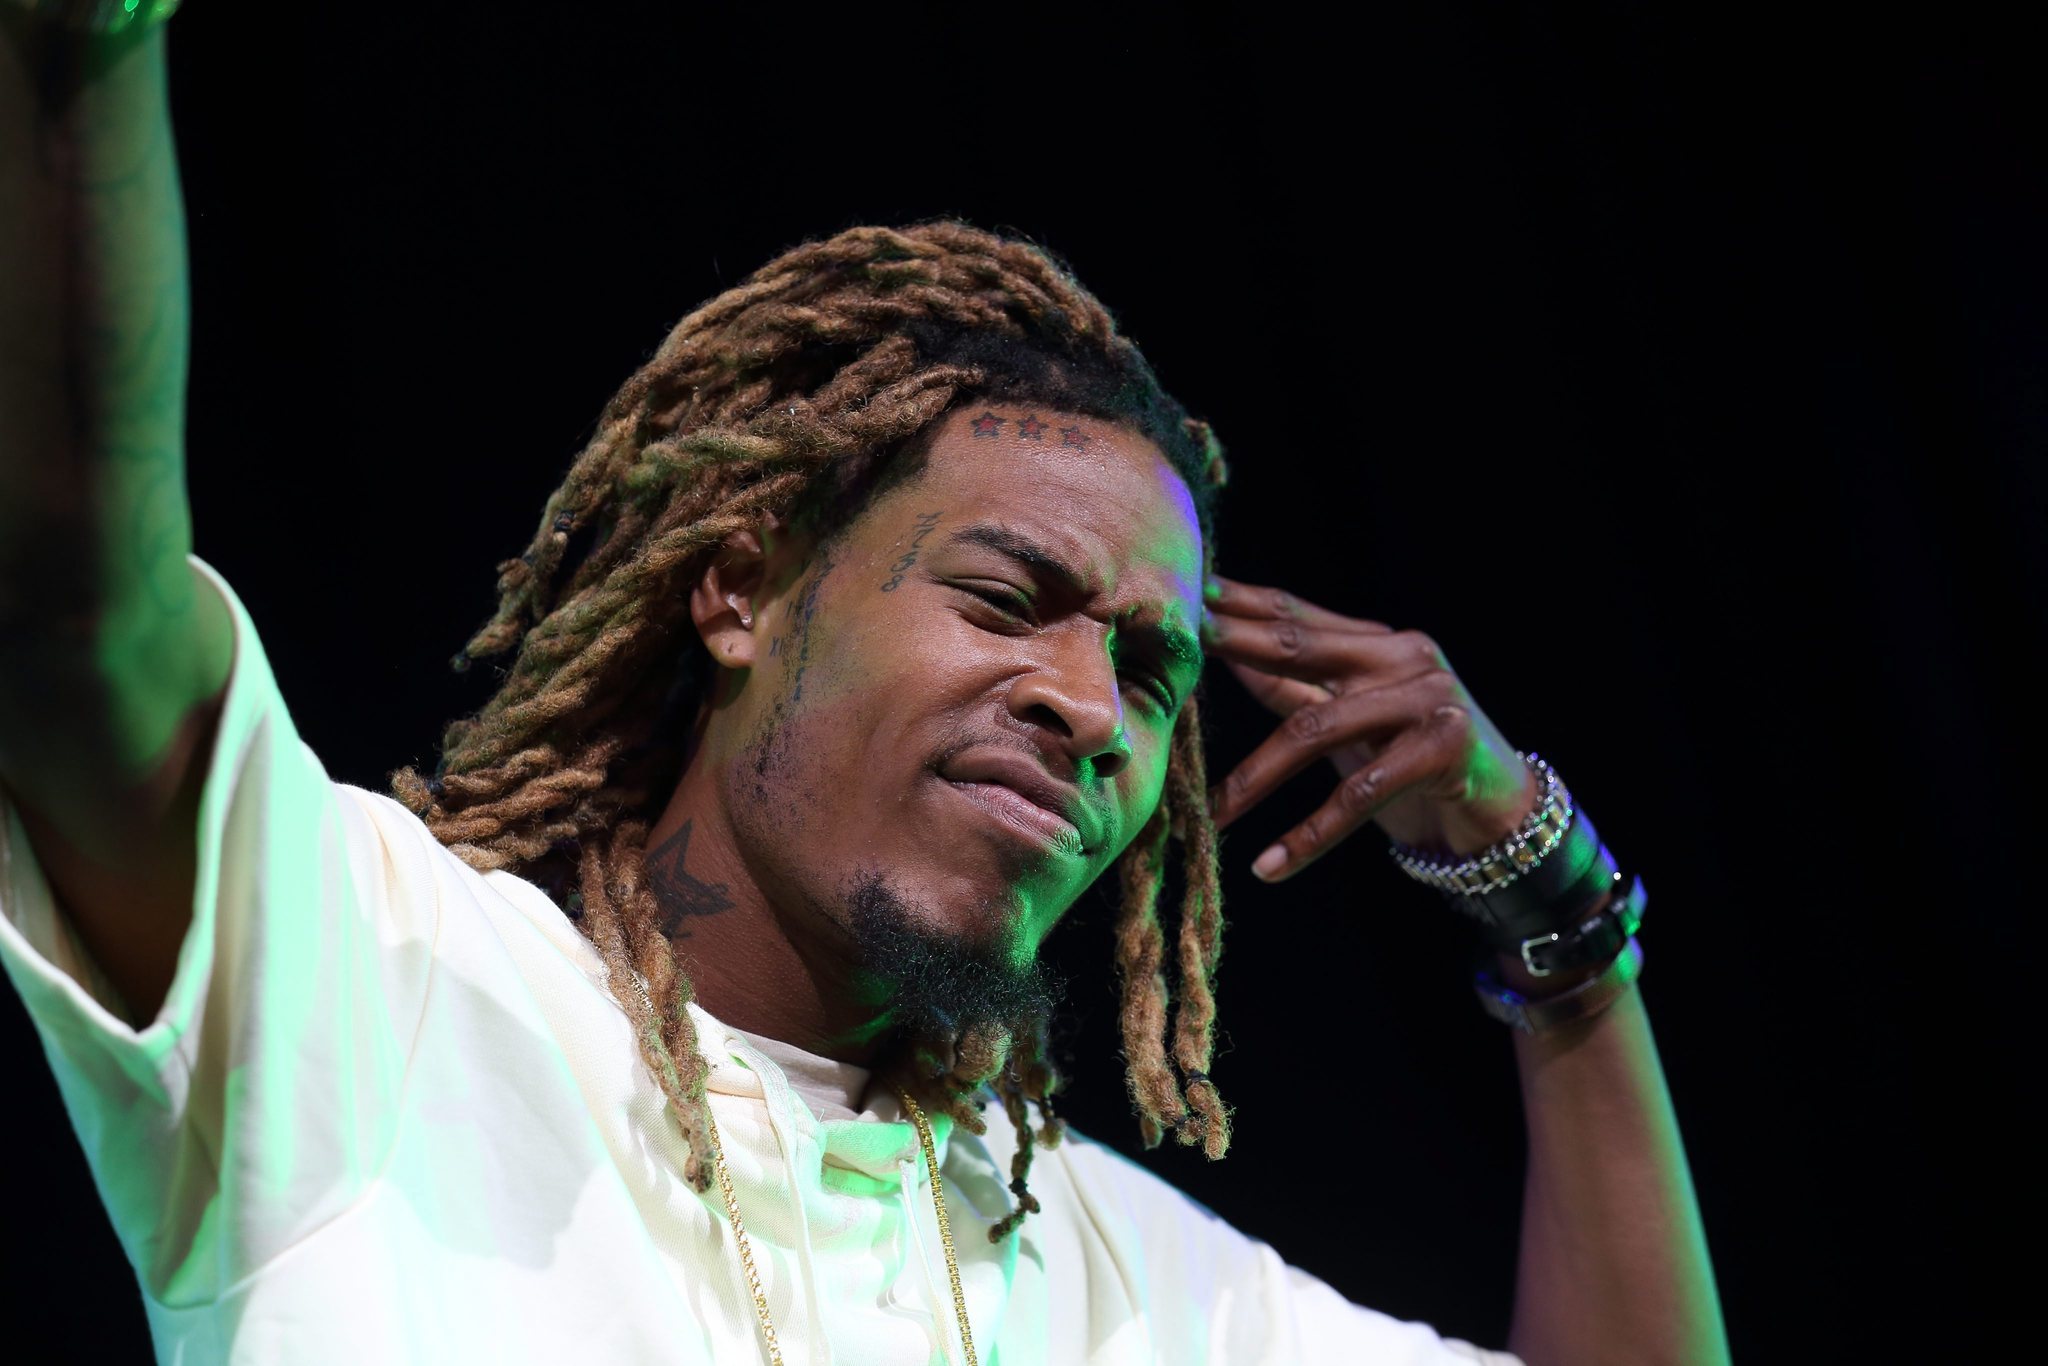 2 girls injured after rapper Fetty Wap jumps from stage - Chicago Tribune2048 x 1366